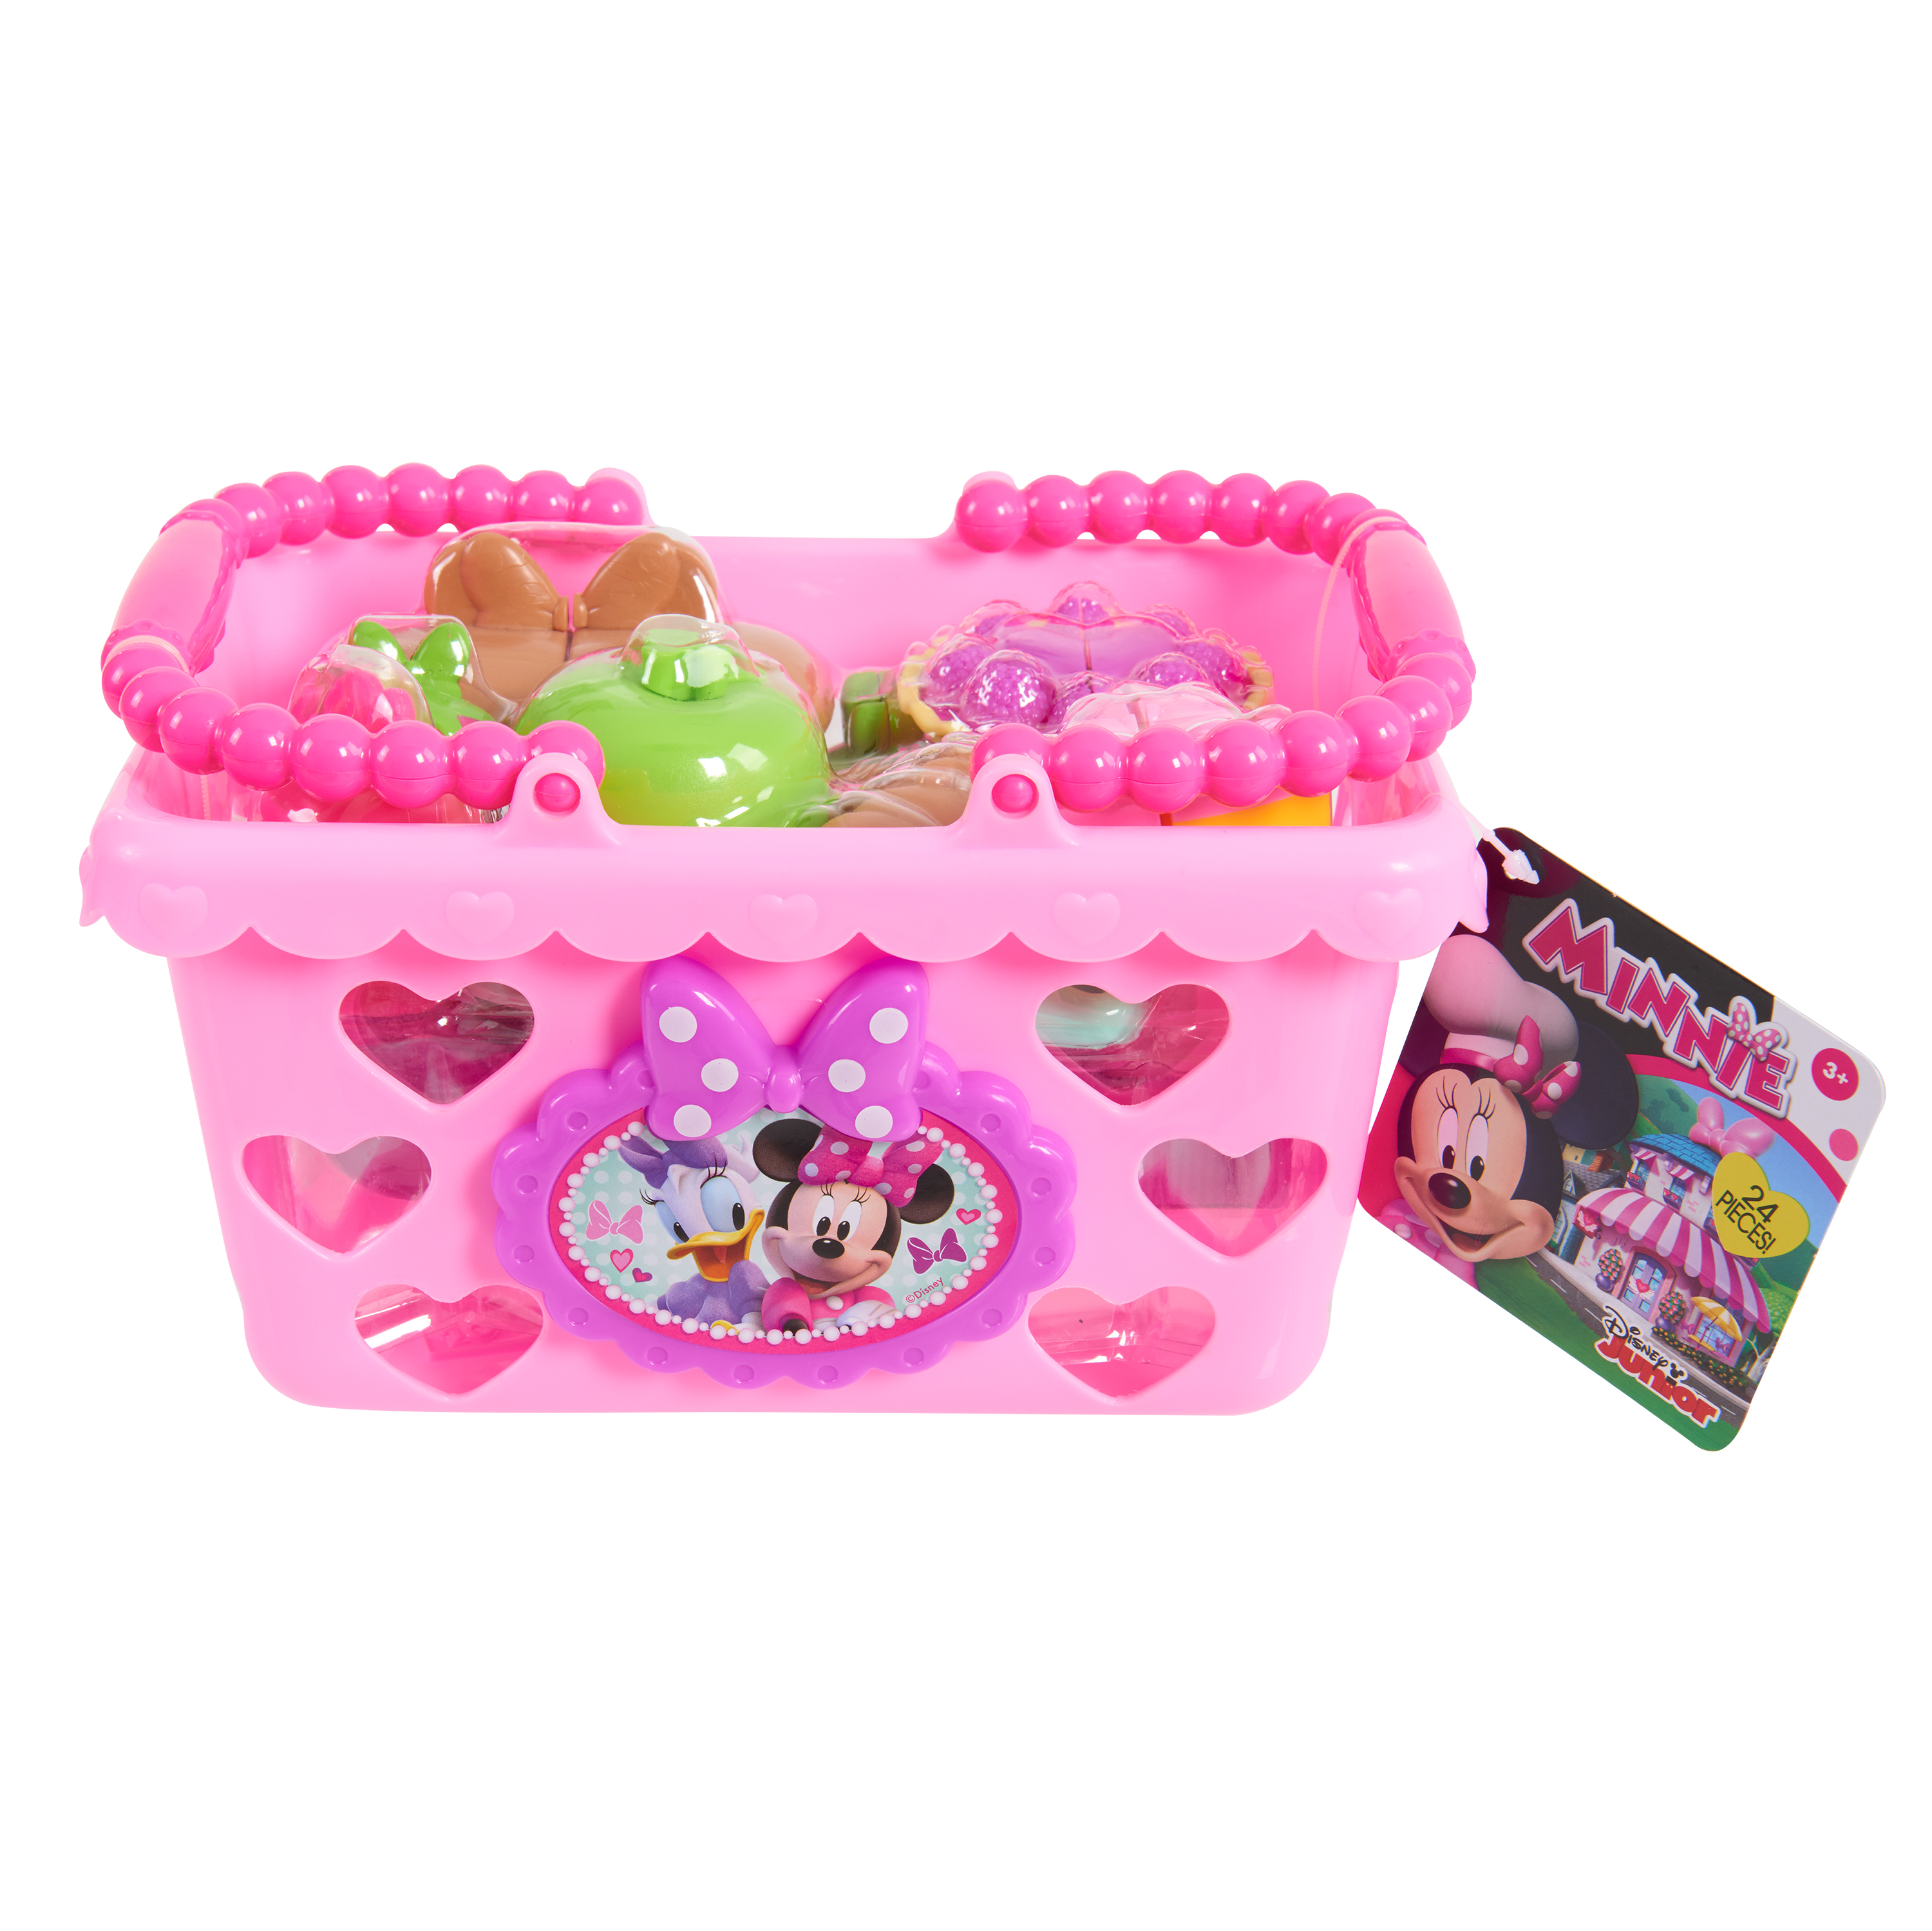 Minnie's happy helpers bowtastic shopping basket - image 2 of 2